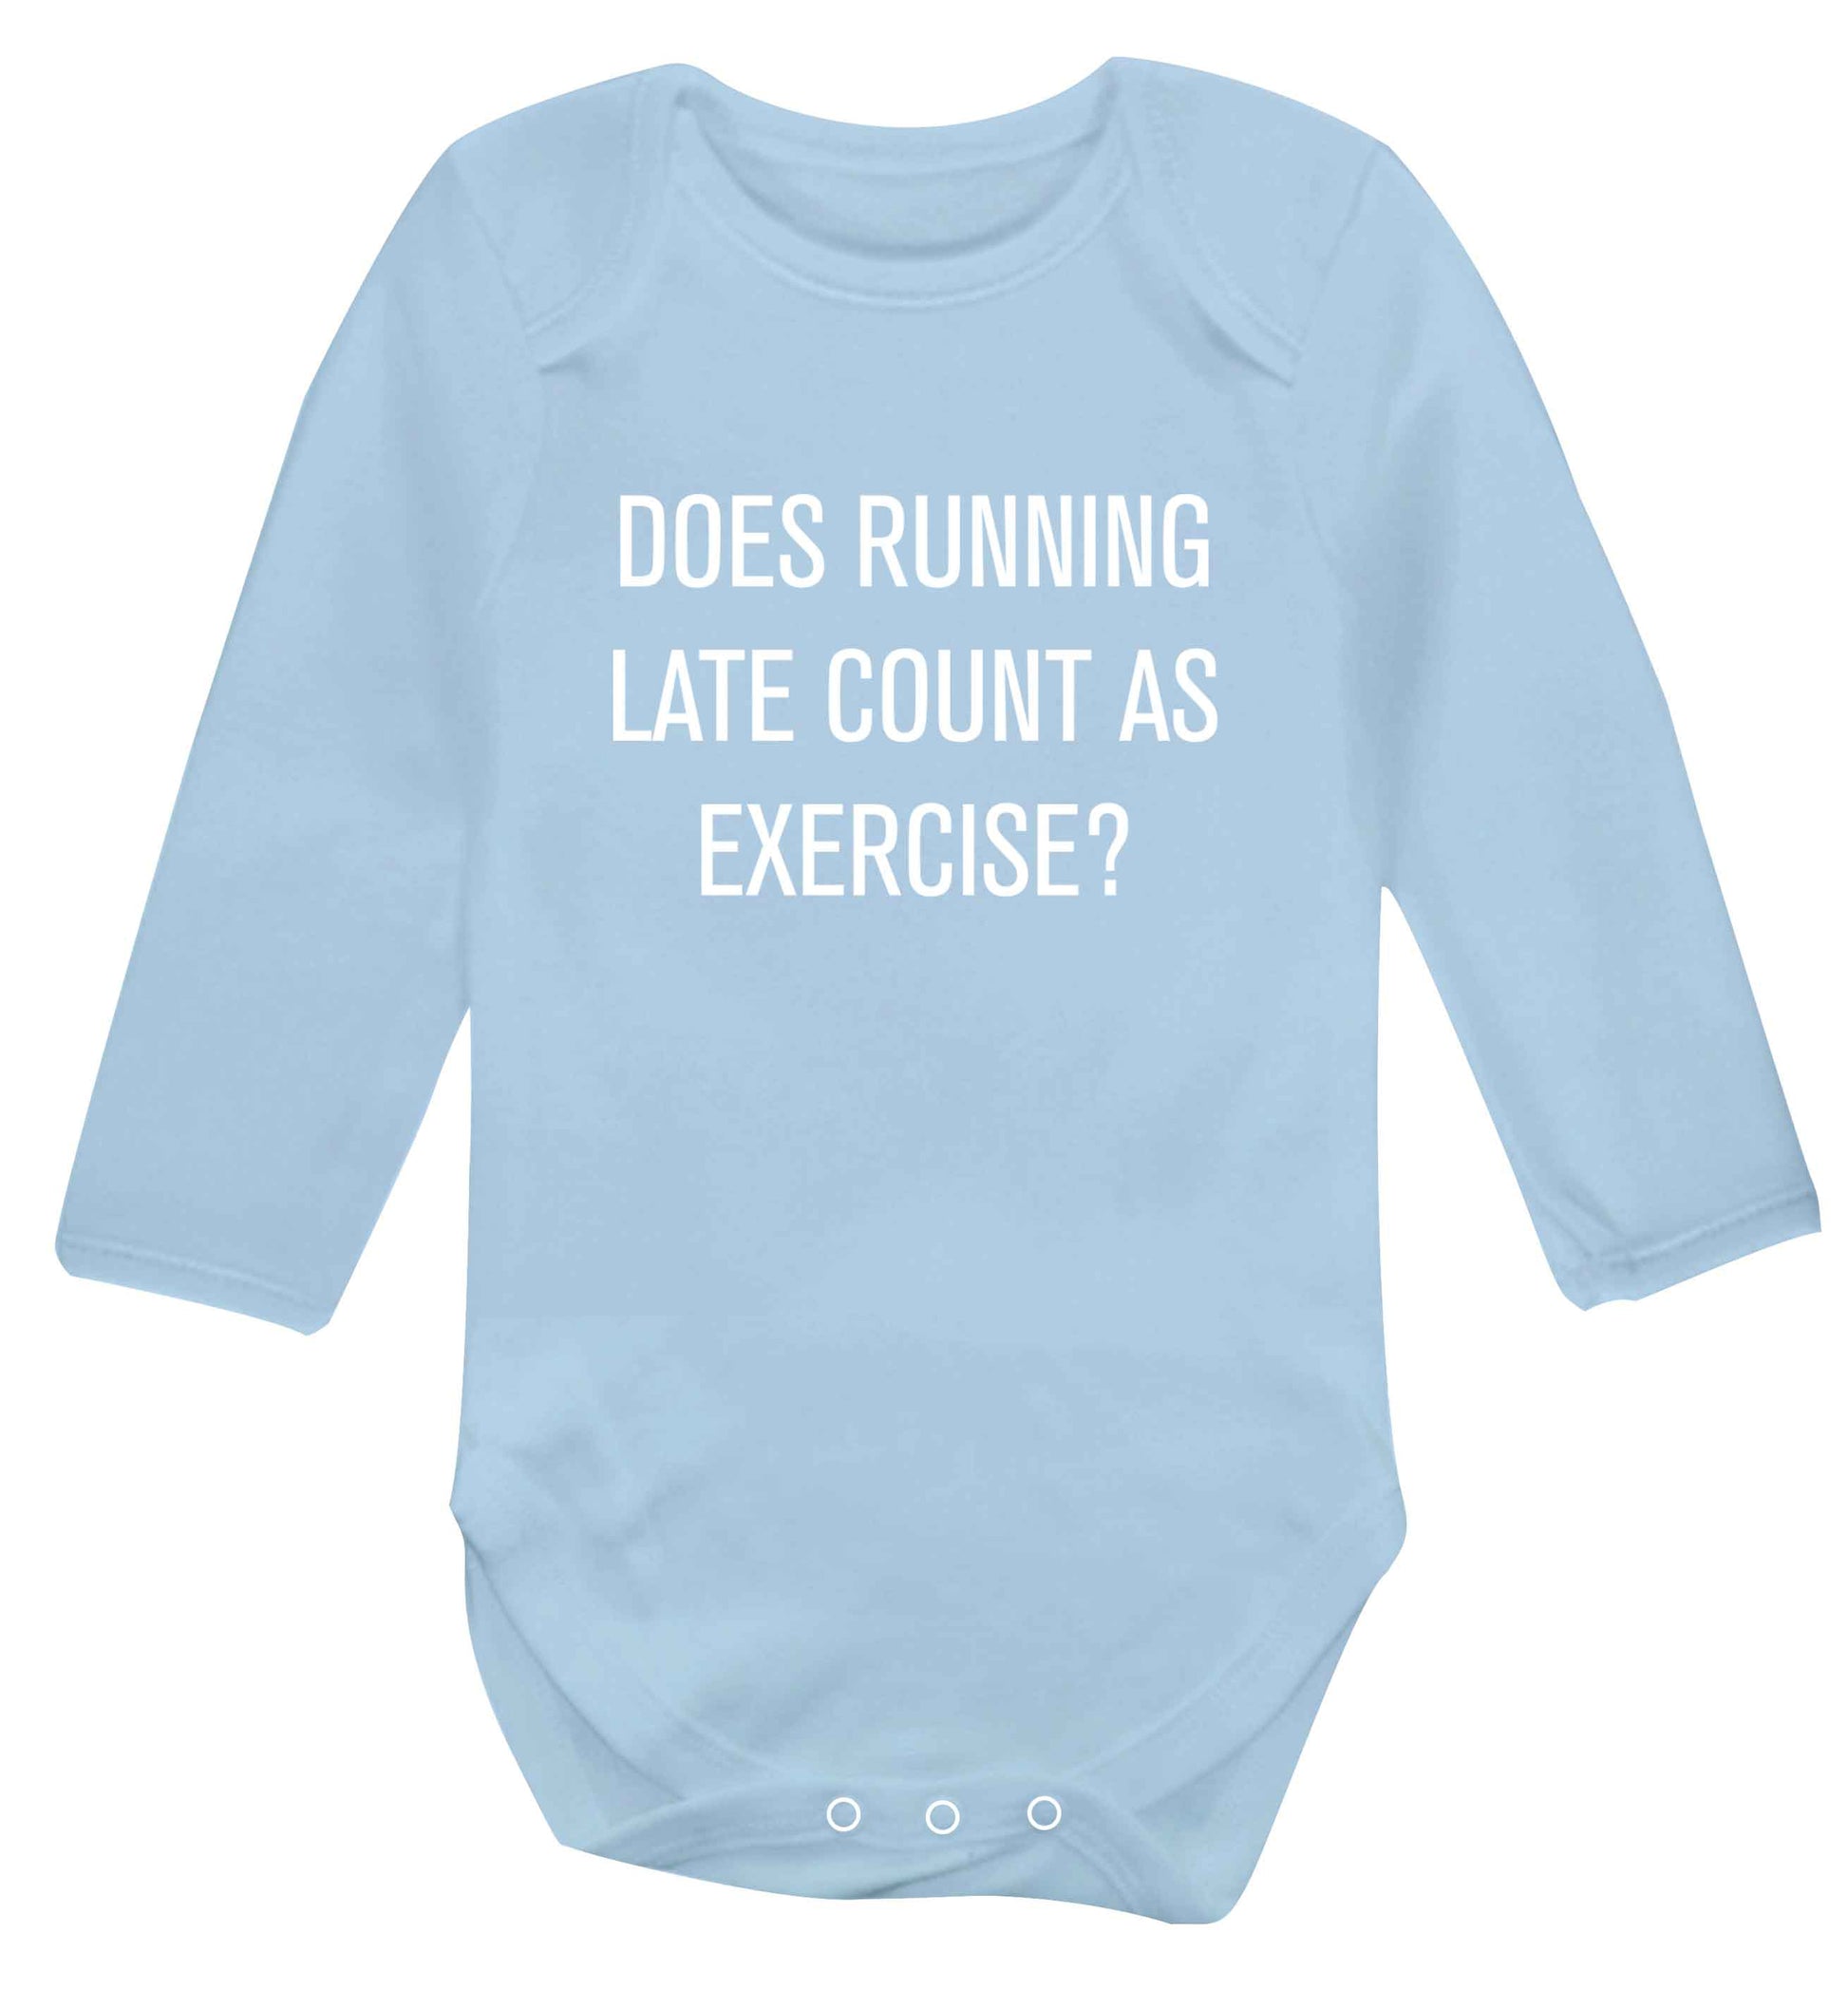 Does running late count as exercise? baby vest long sleeved pale blue 6-12 months